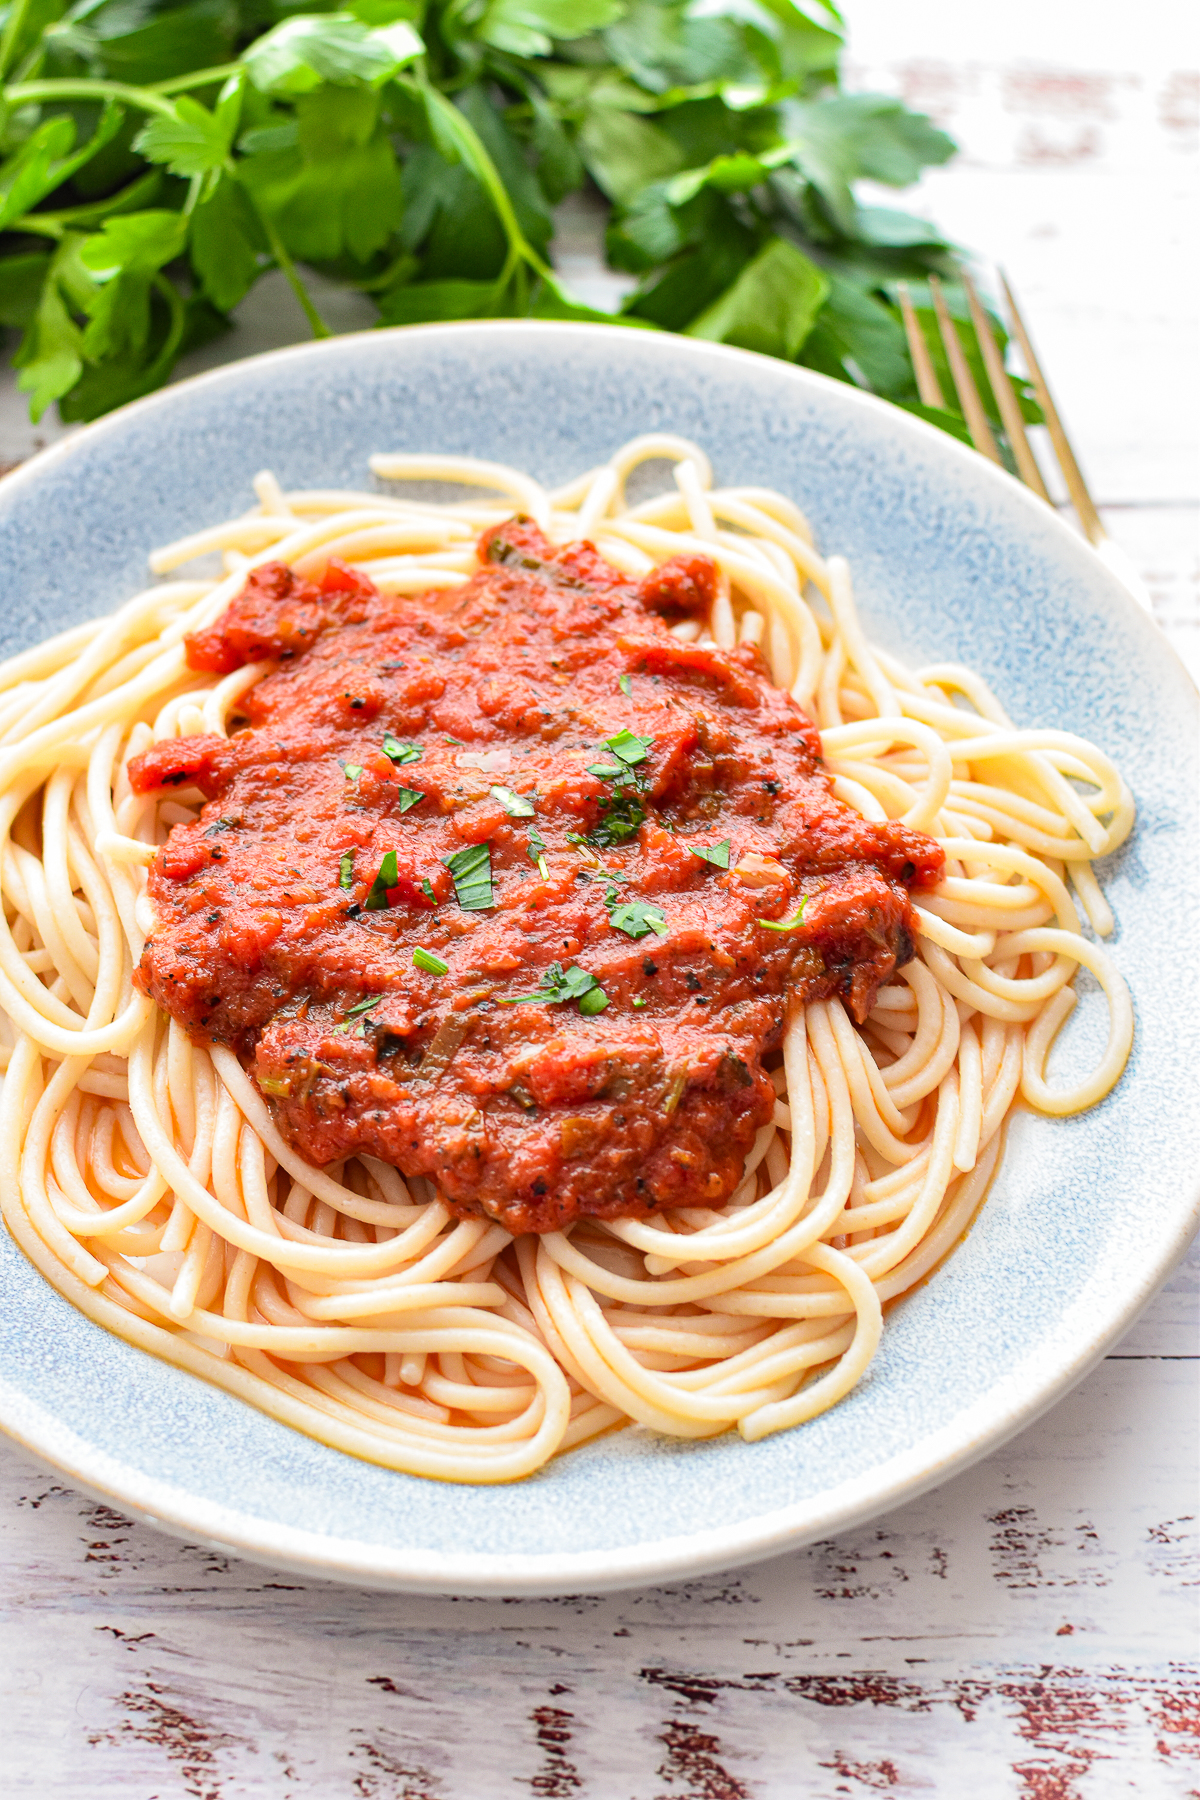 low fodmap spaghetti covered in marinara sauce on a blue and white plate in front of a bunch of italian parsley.